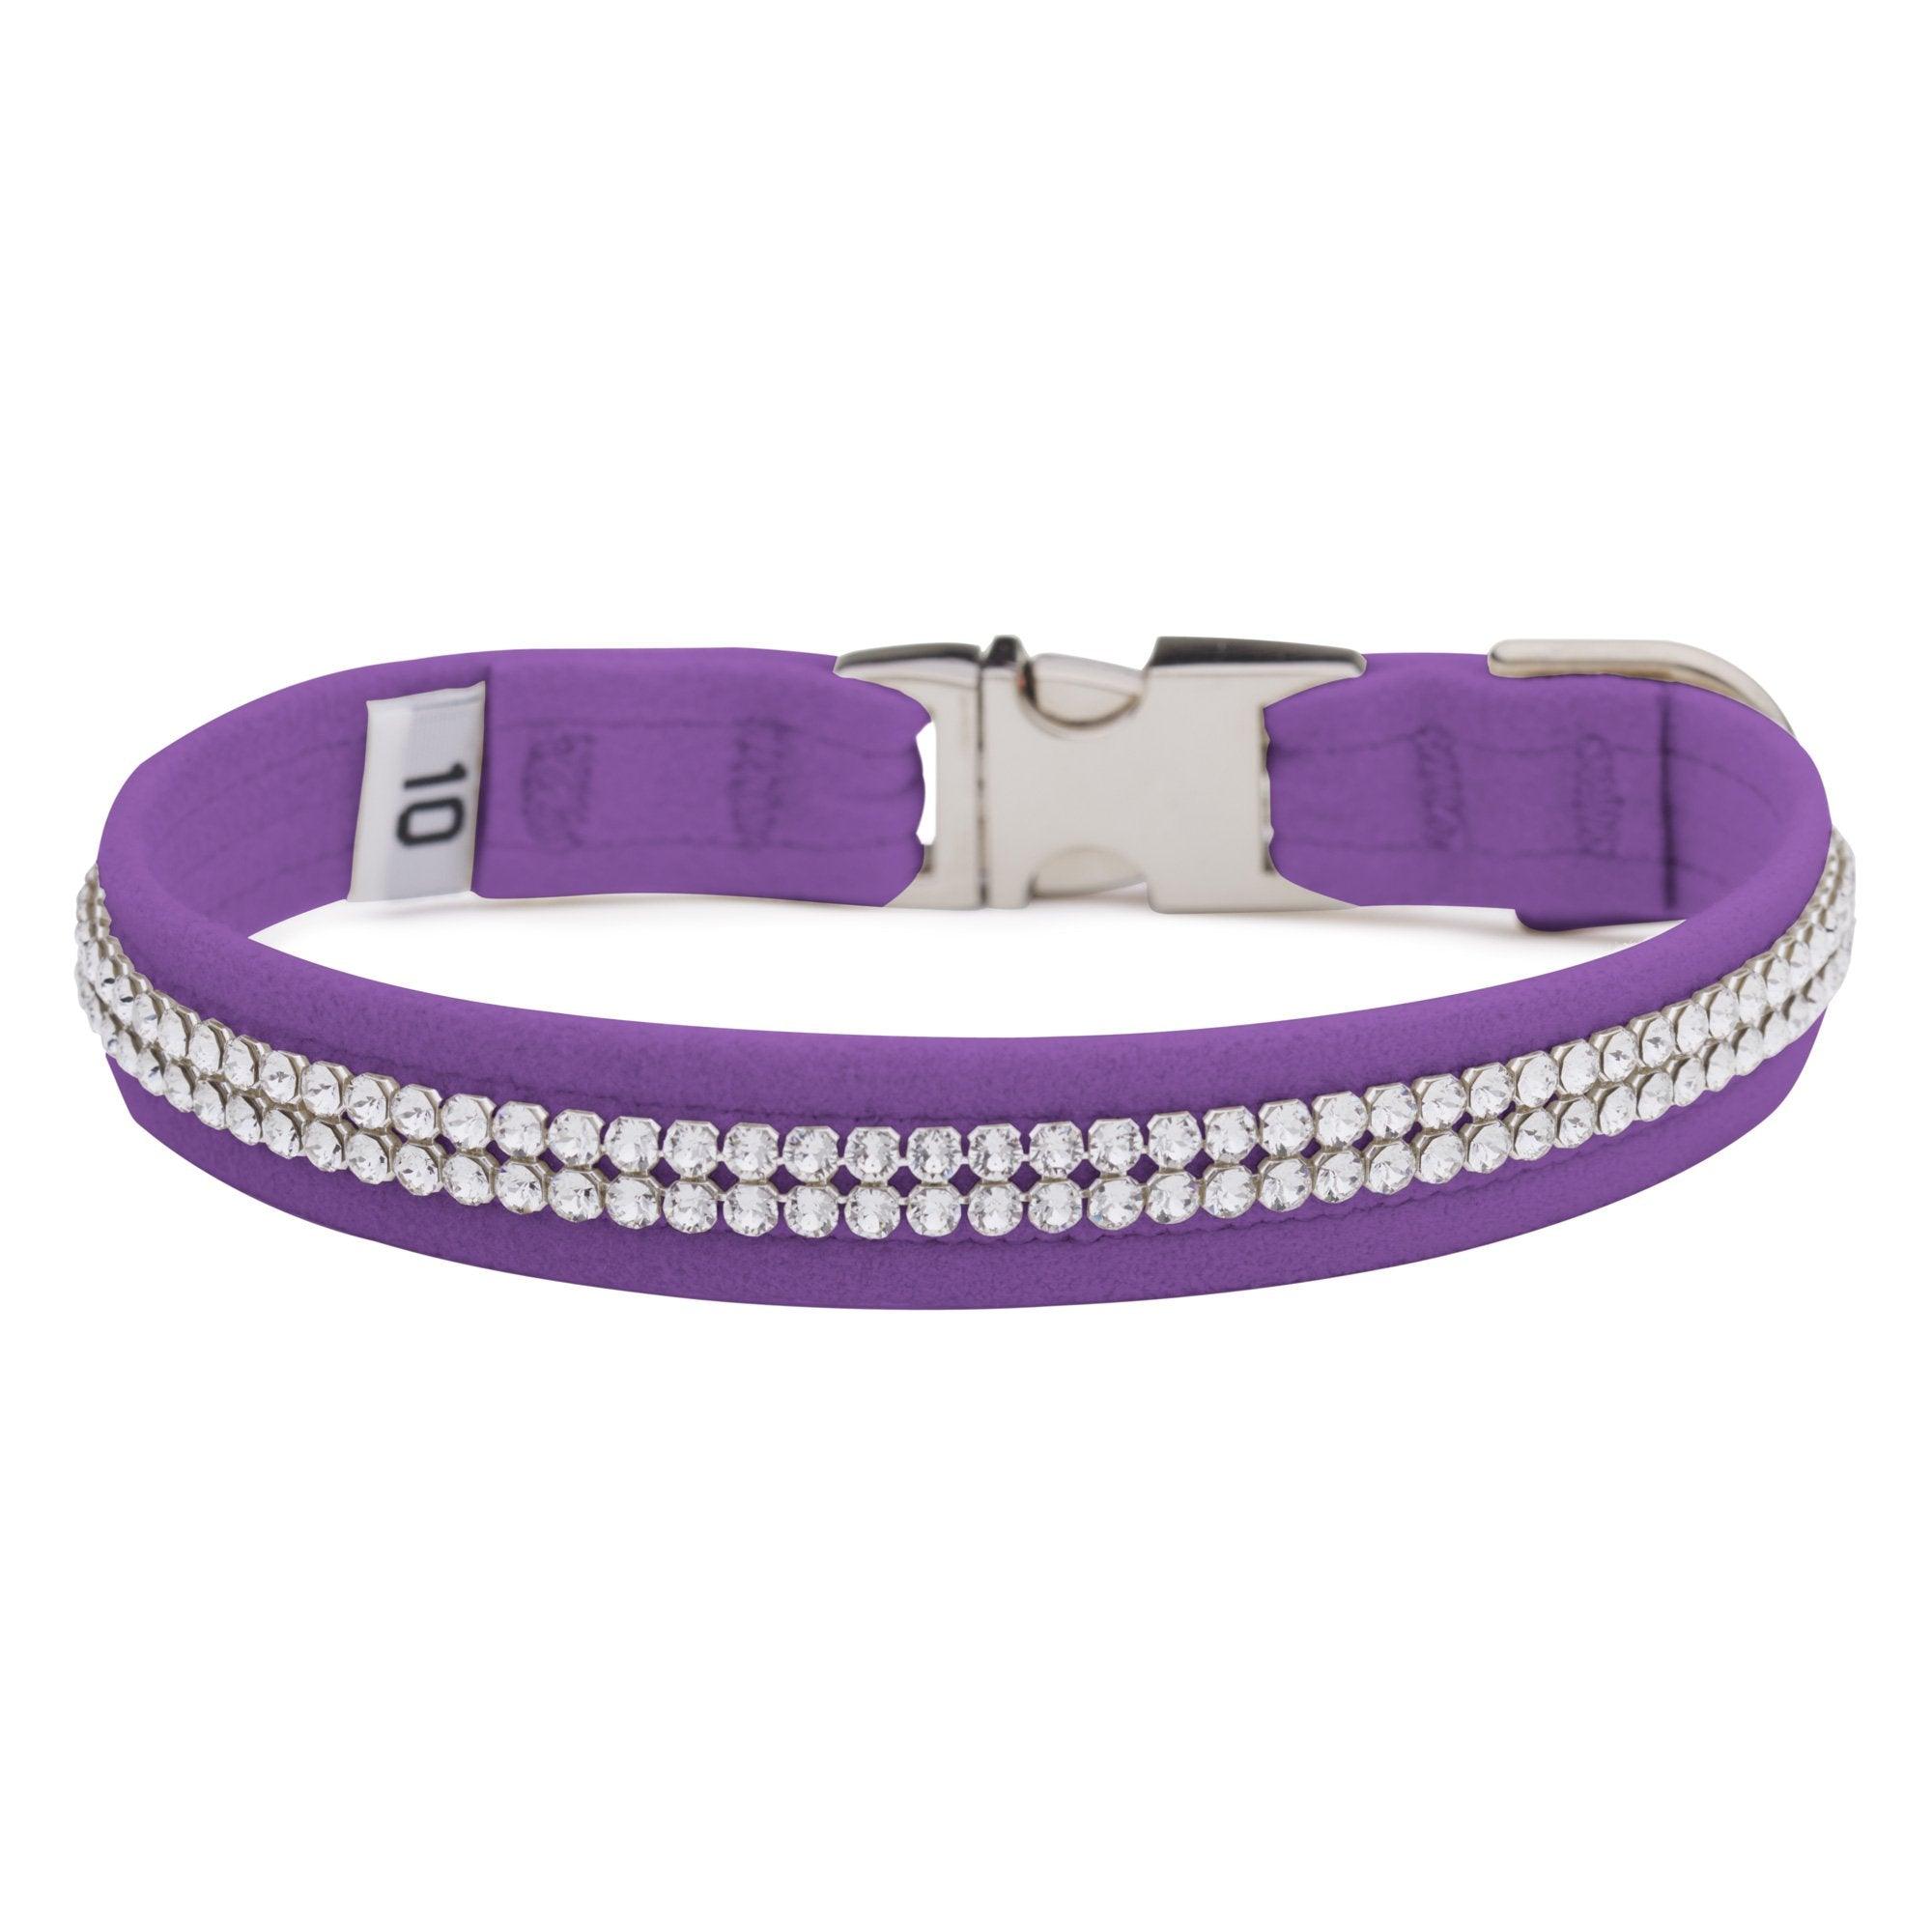 Ultraviolet 2 Row Giltmore Perfect Fit Collar - Rocky & Maggie's Pet Boutique and Salon